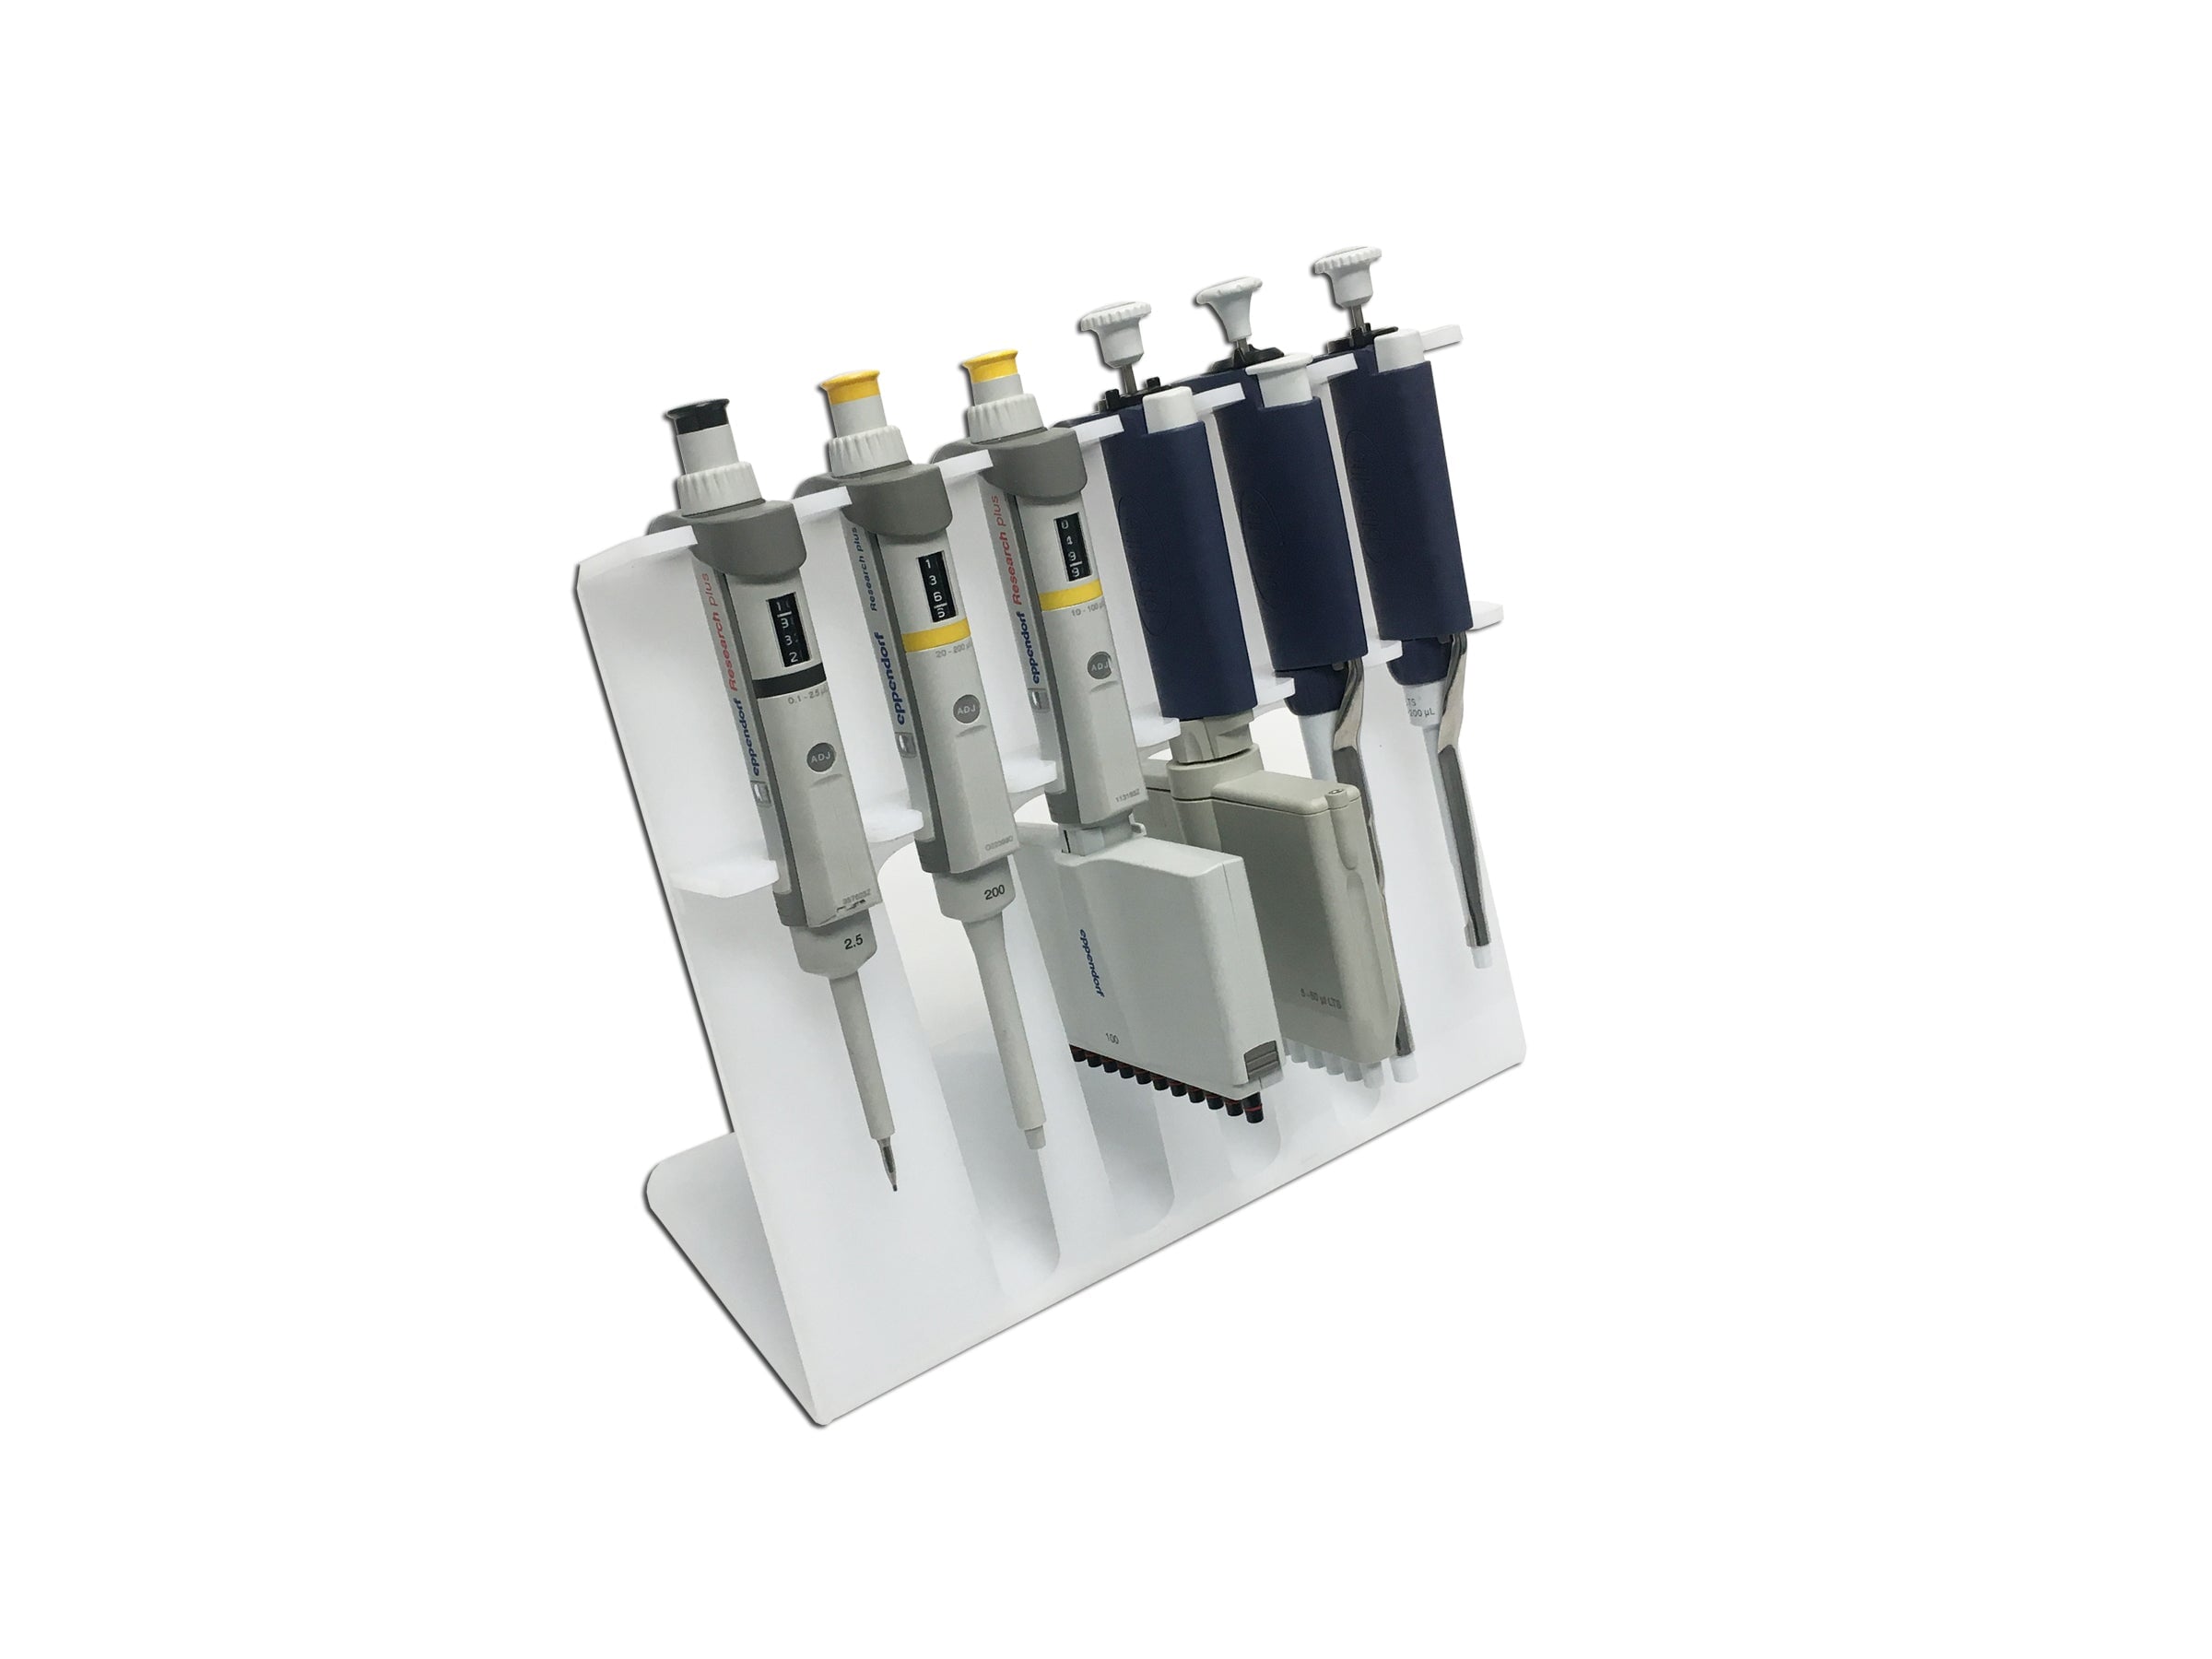 MTC Bio P4406 SureStand™ Pipette Stand for 6 pipettes, up to four multi-channels, acrylic